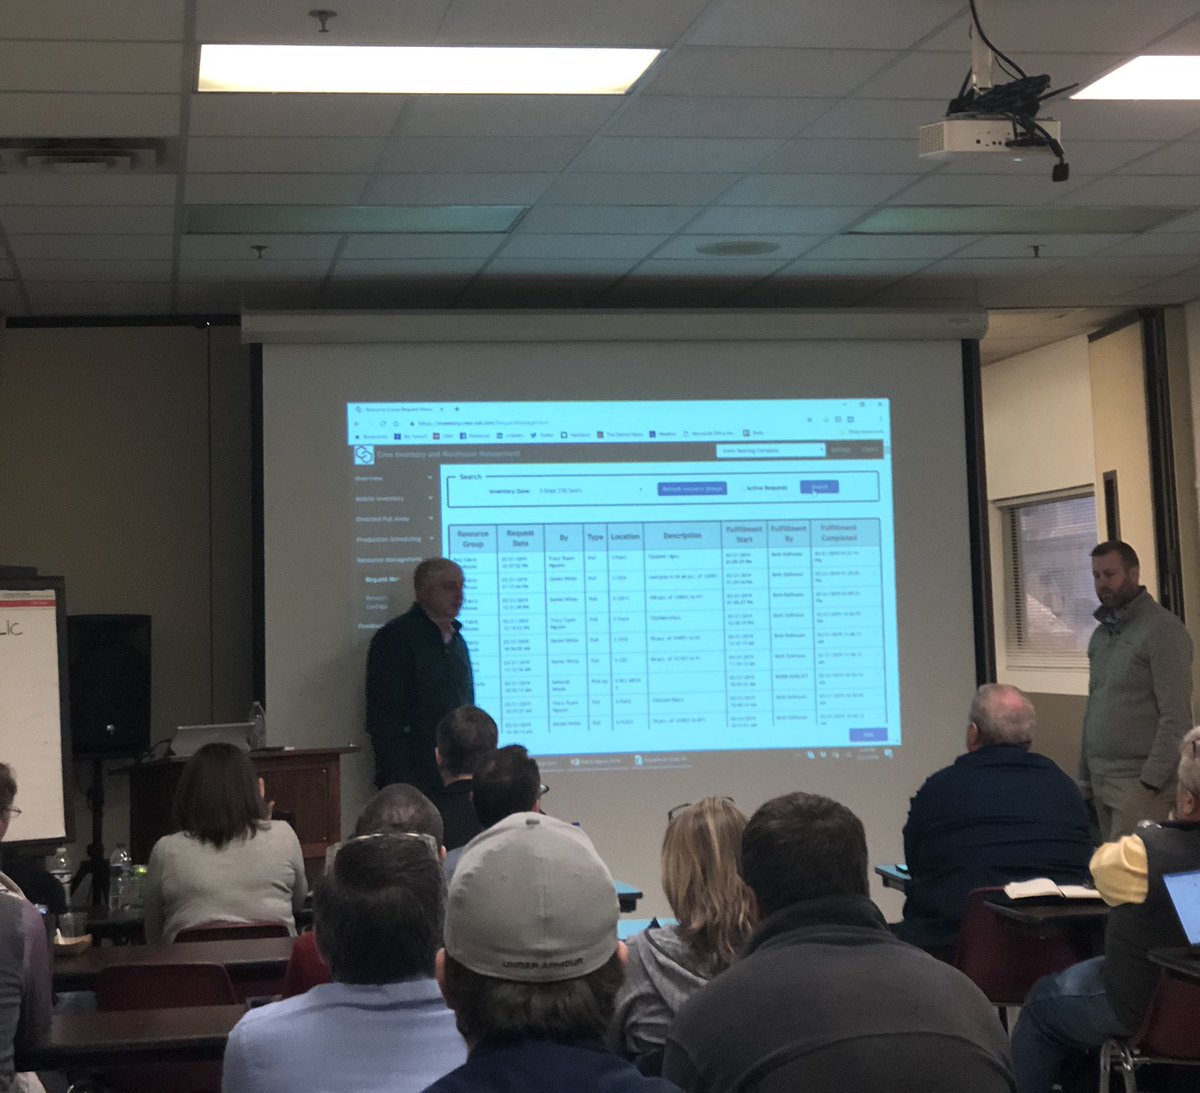 CREO Solutions @jason_g_prater is in the house. Loving these #mobile inventory #cloud #erp solutions at the #plex Michigan User Group! @PlexSystems #inventoryaccuracy